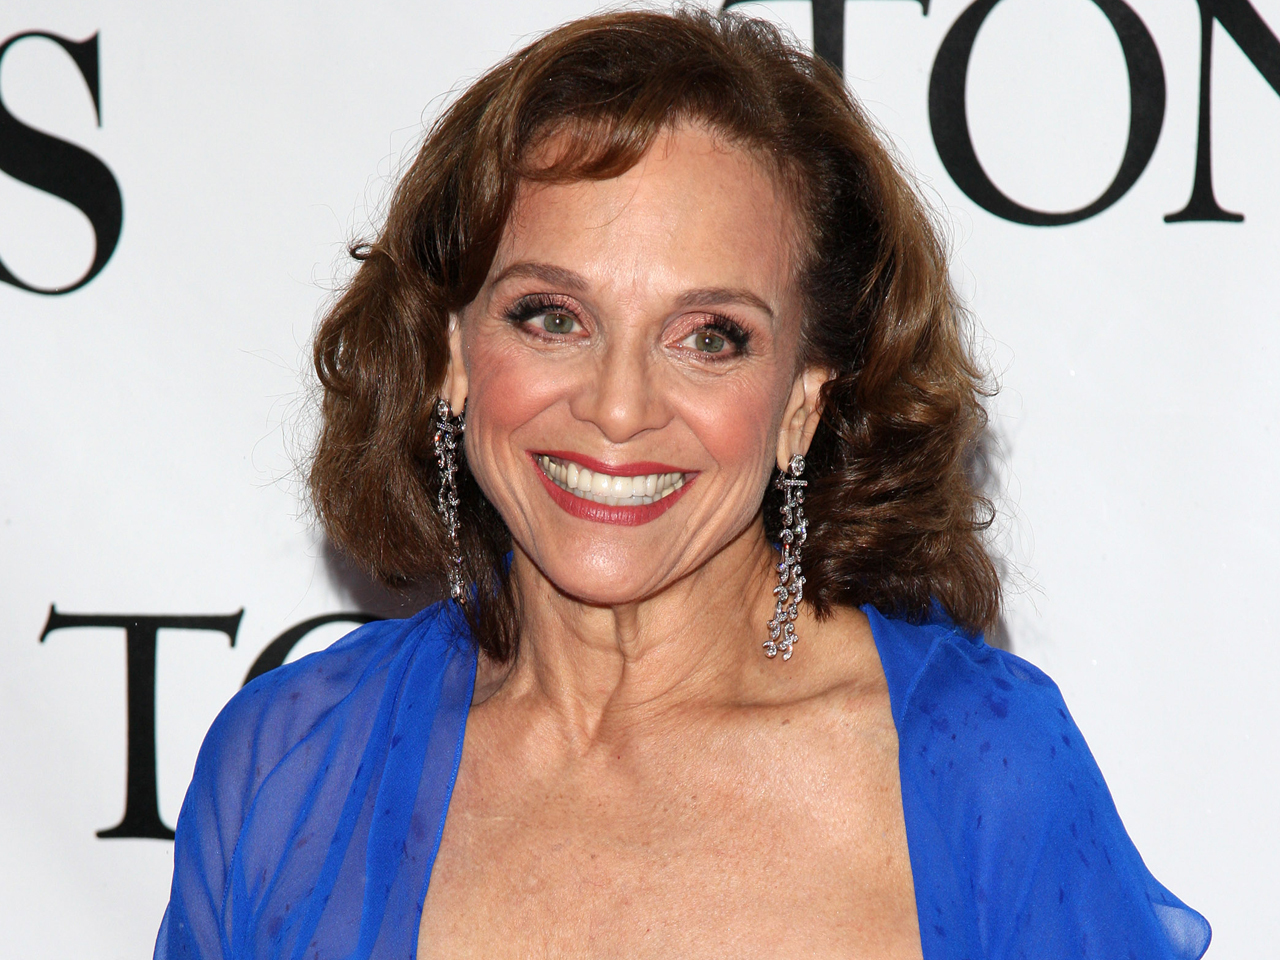 "Rest In Peace, Harper!": Valerie Harper, who survived to ply her madcap comic style for a new generation of audiences, dies at 80. 9